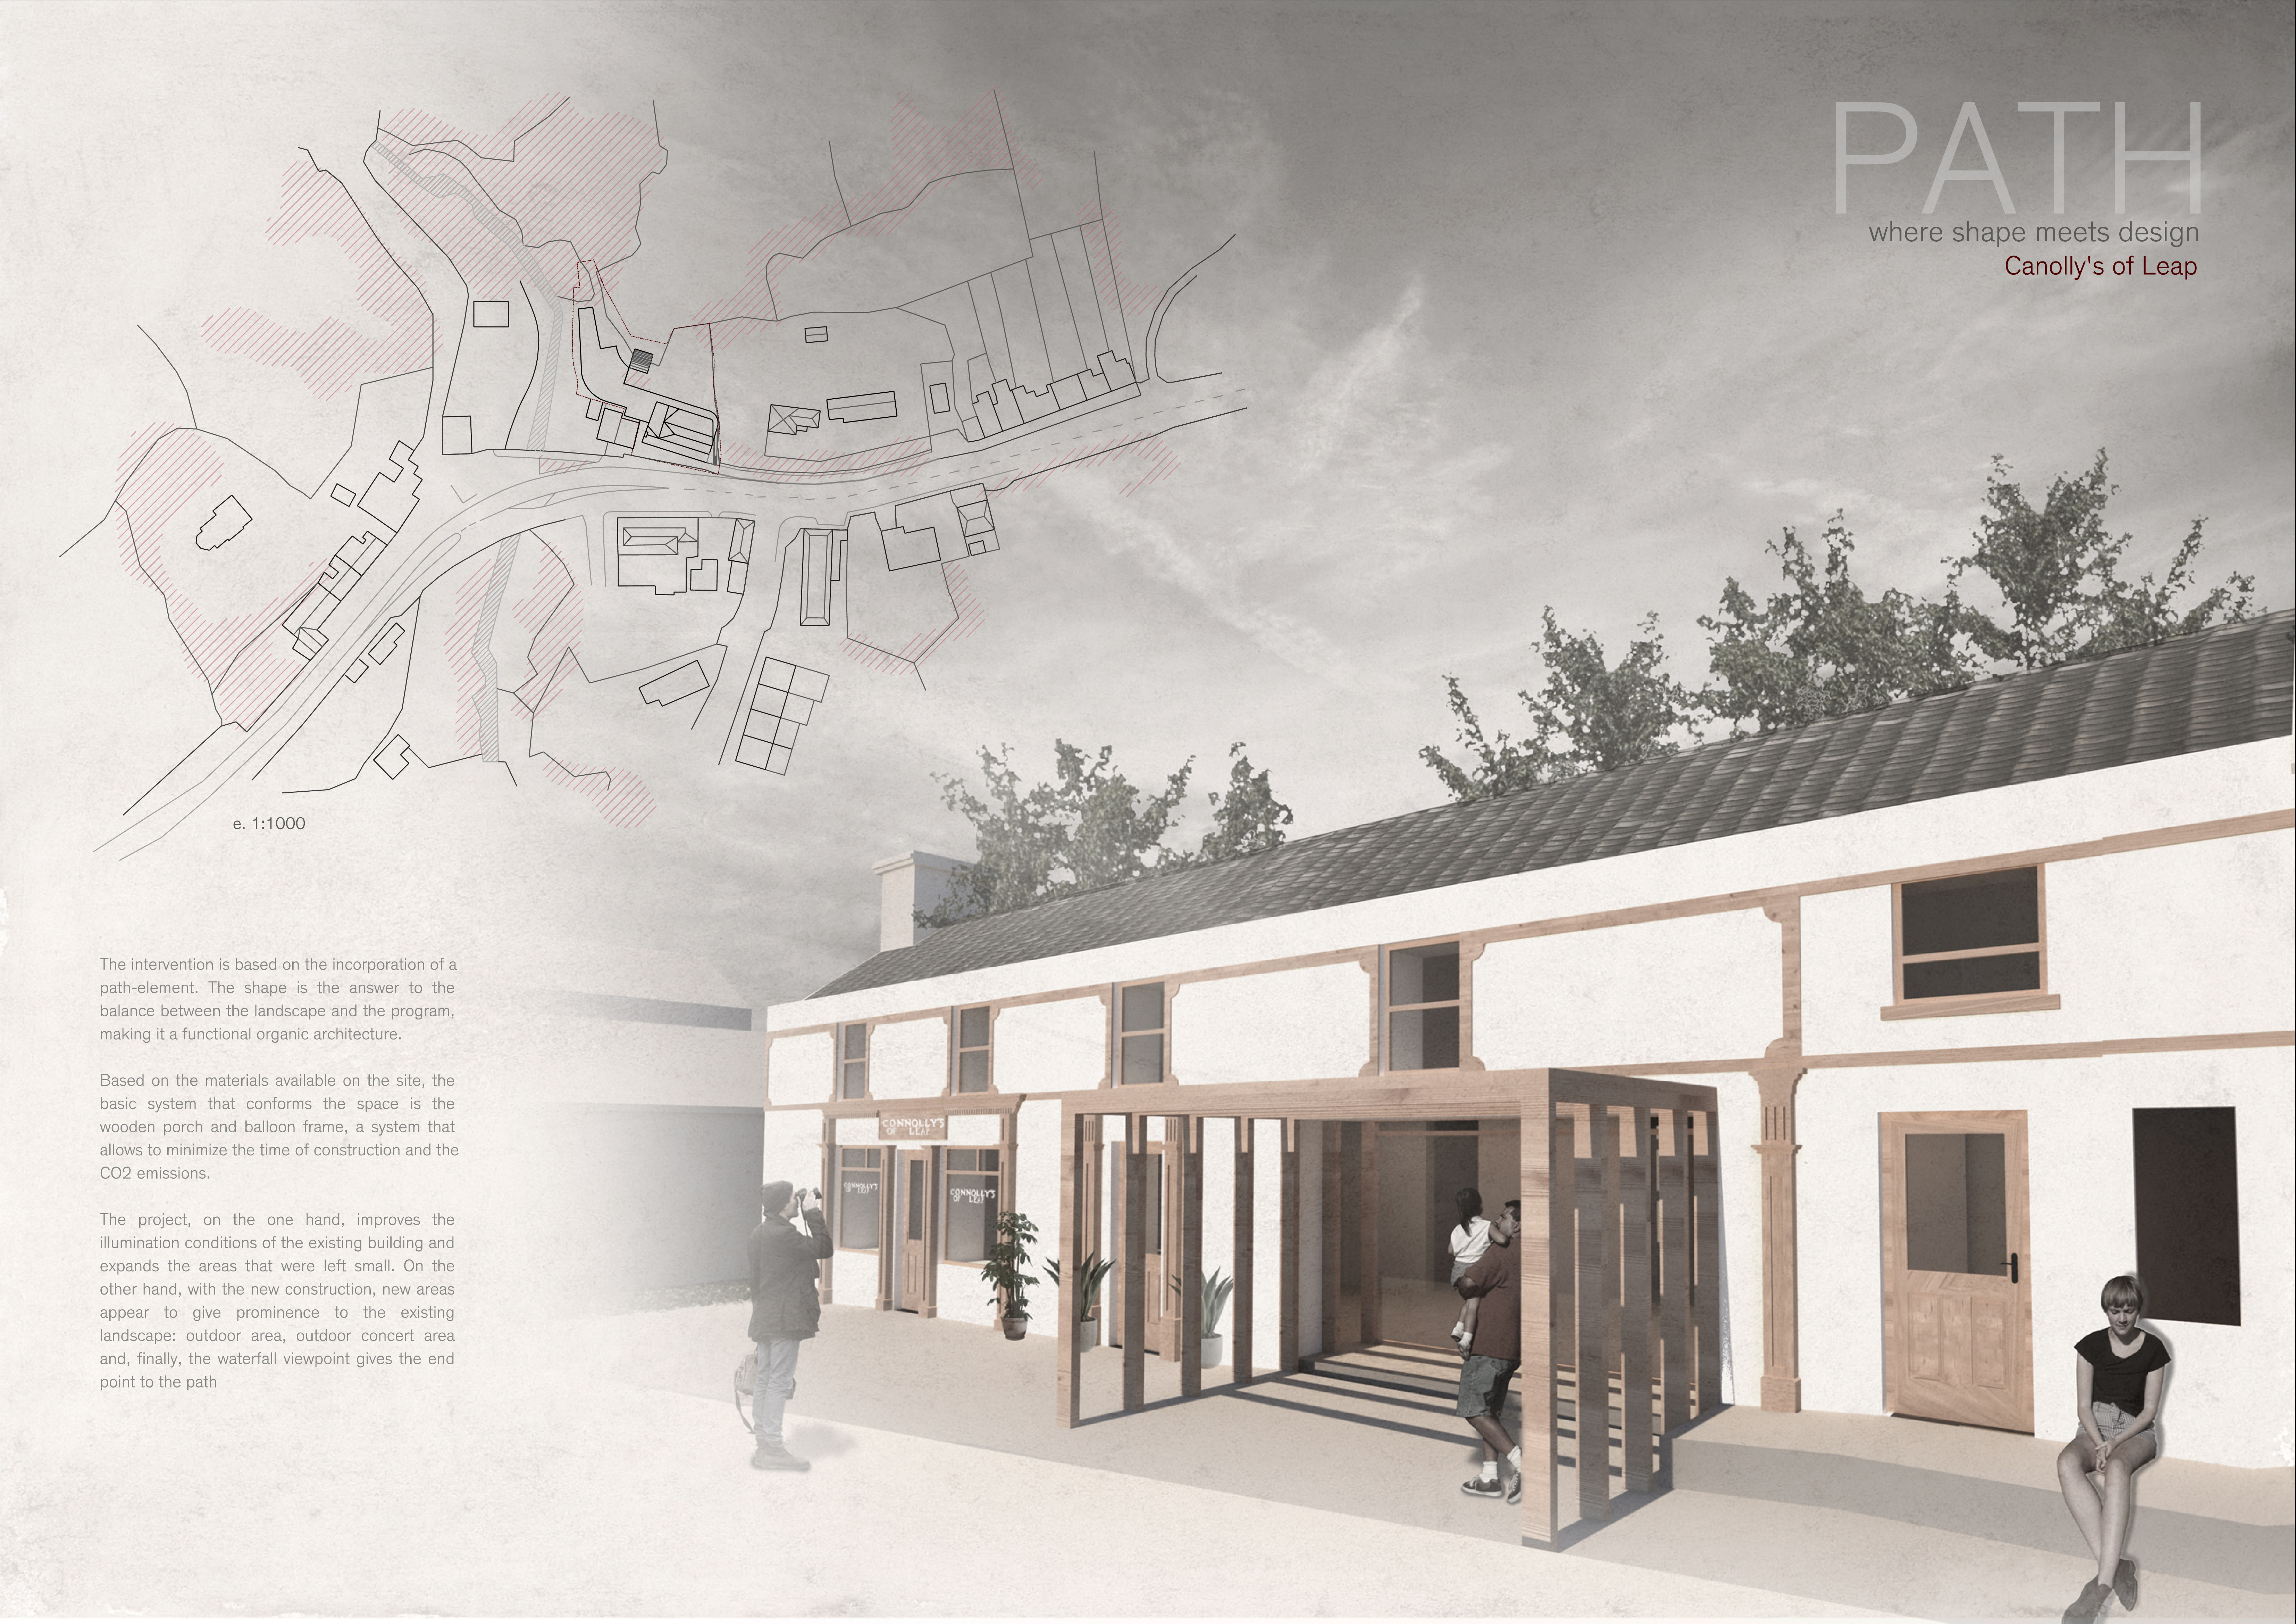 Honorable mention - irishcultmusicvenue architecture competition winners